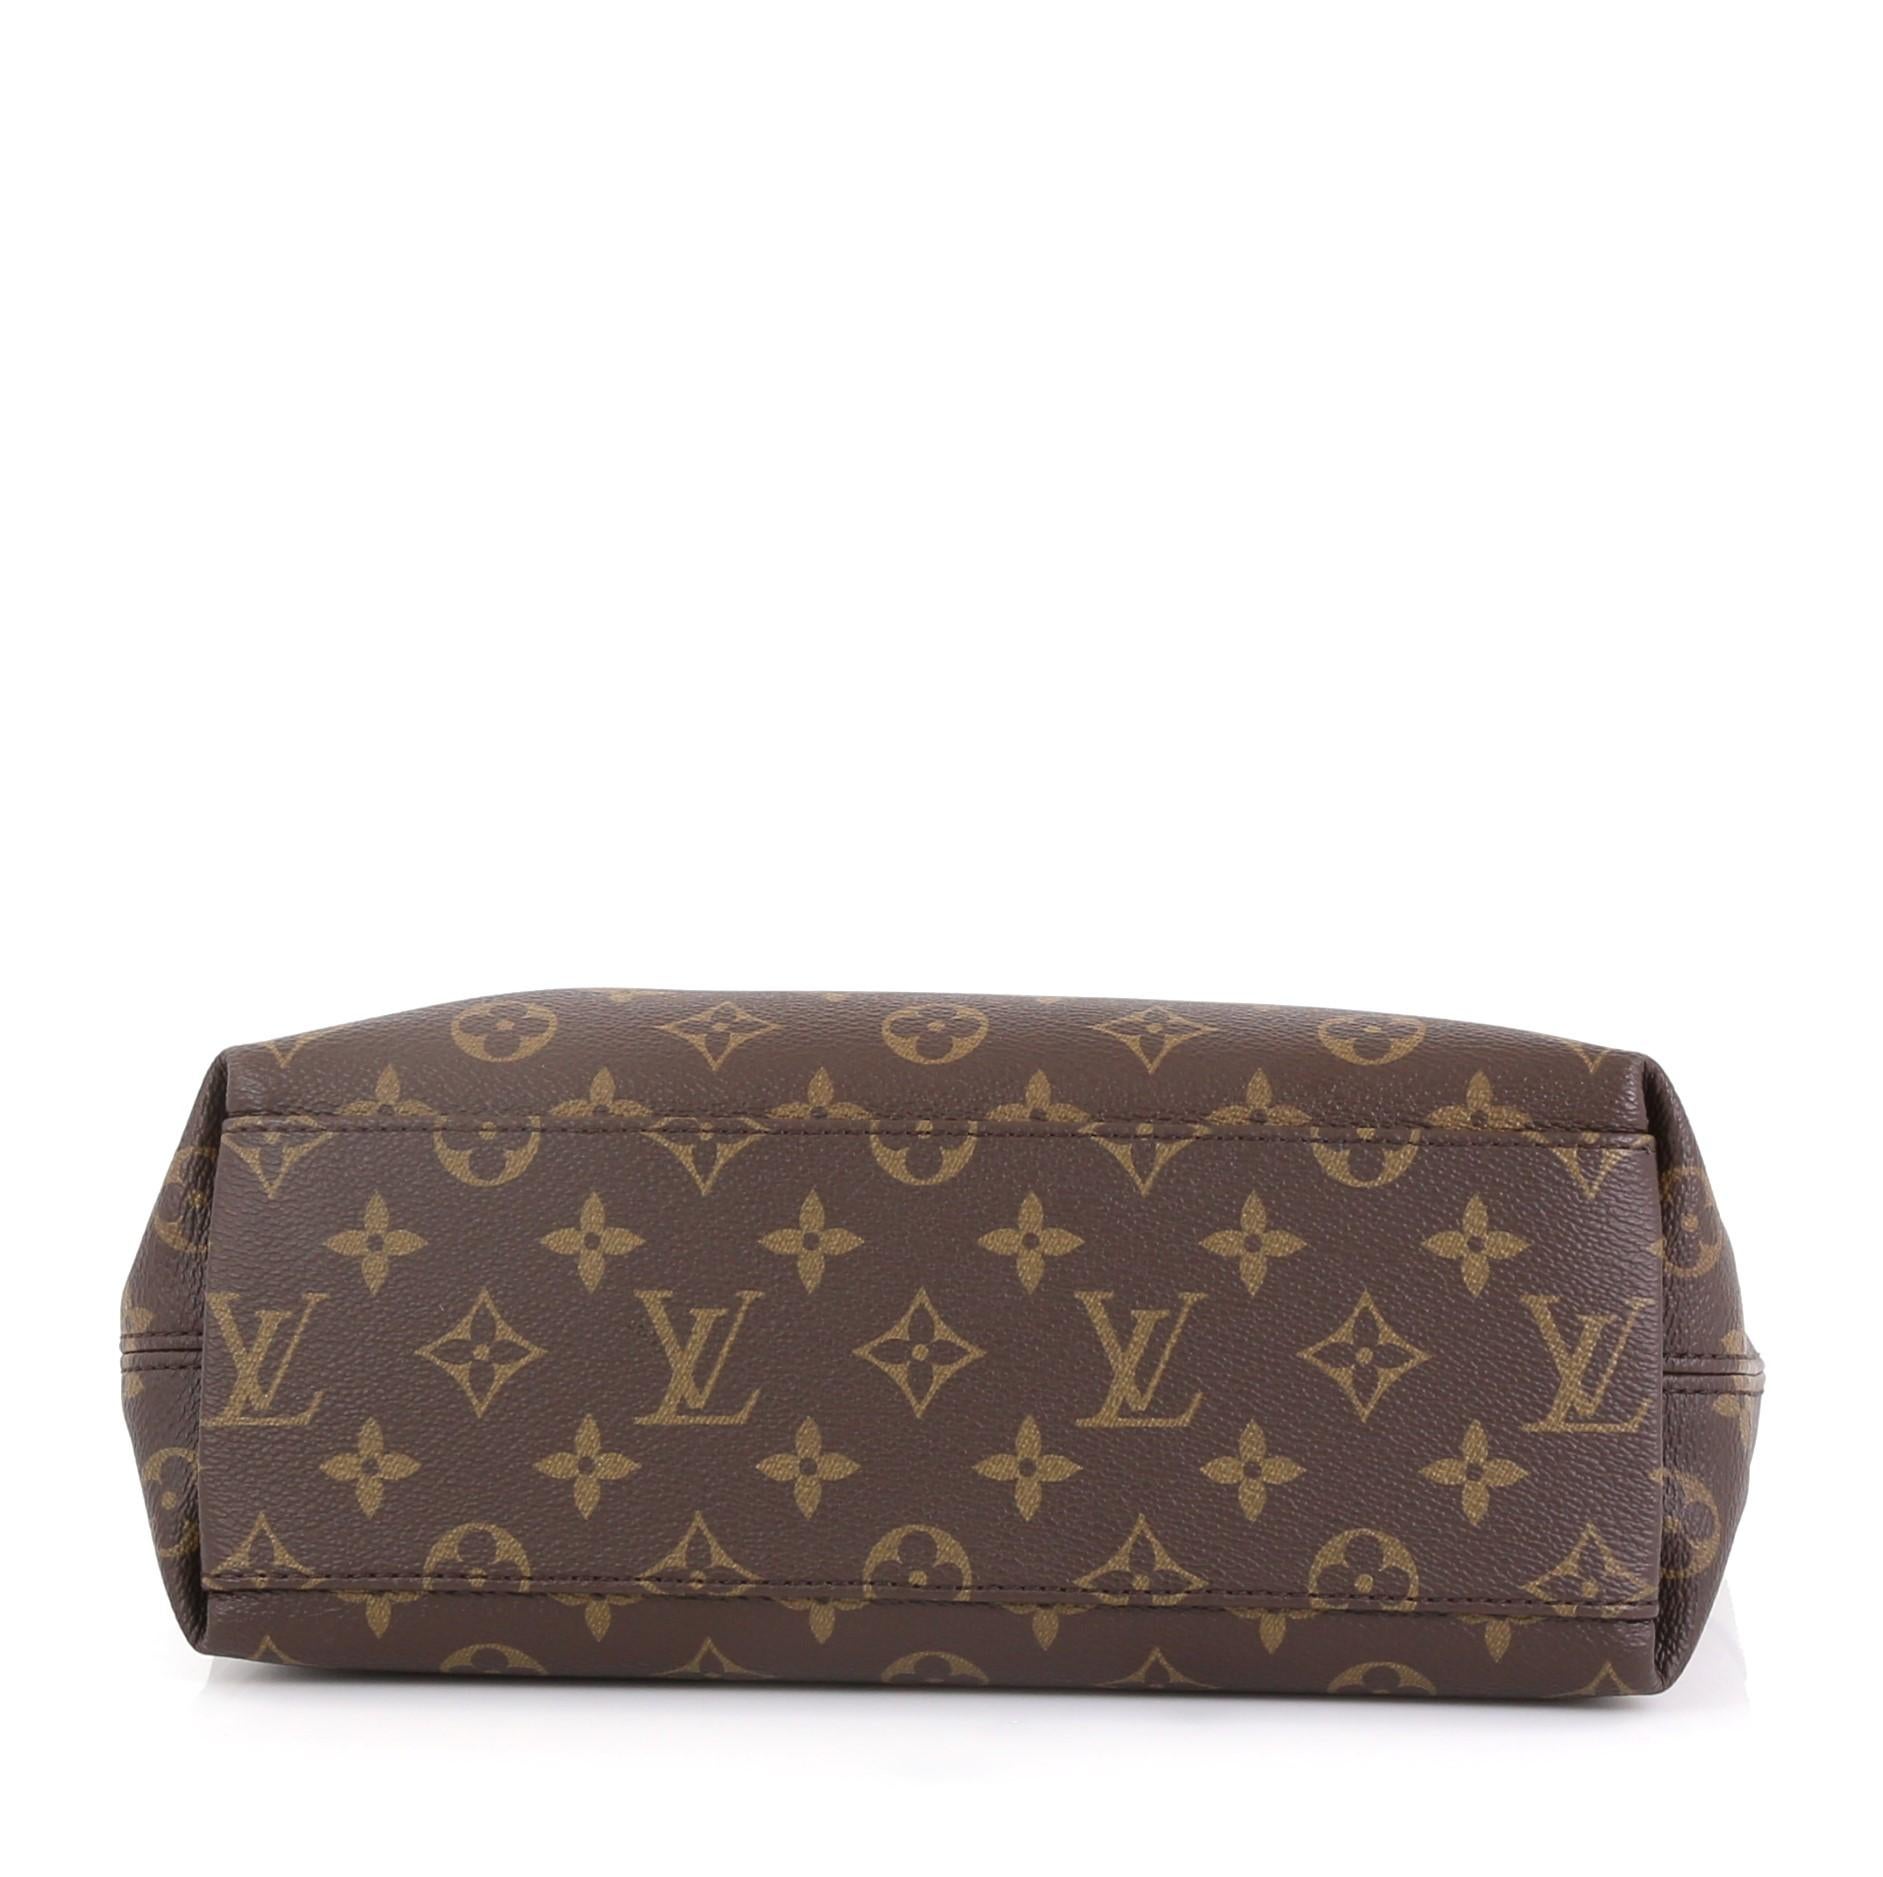 Women's or Men's Louis Vuitton Tuileries Besace Bag Monogram Canvas with Leather